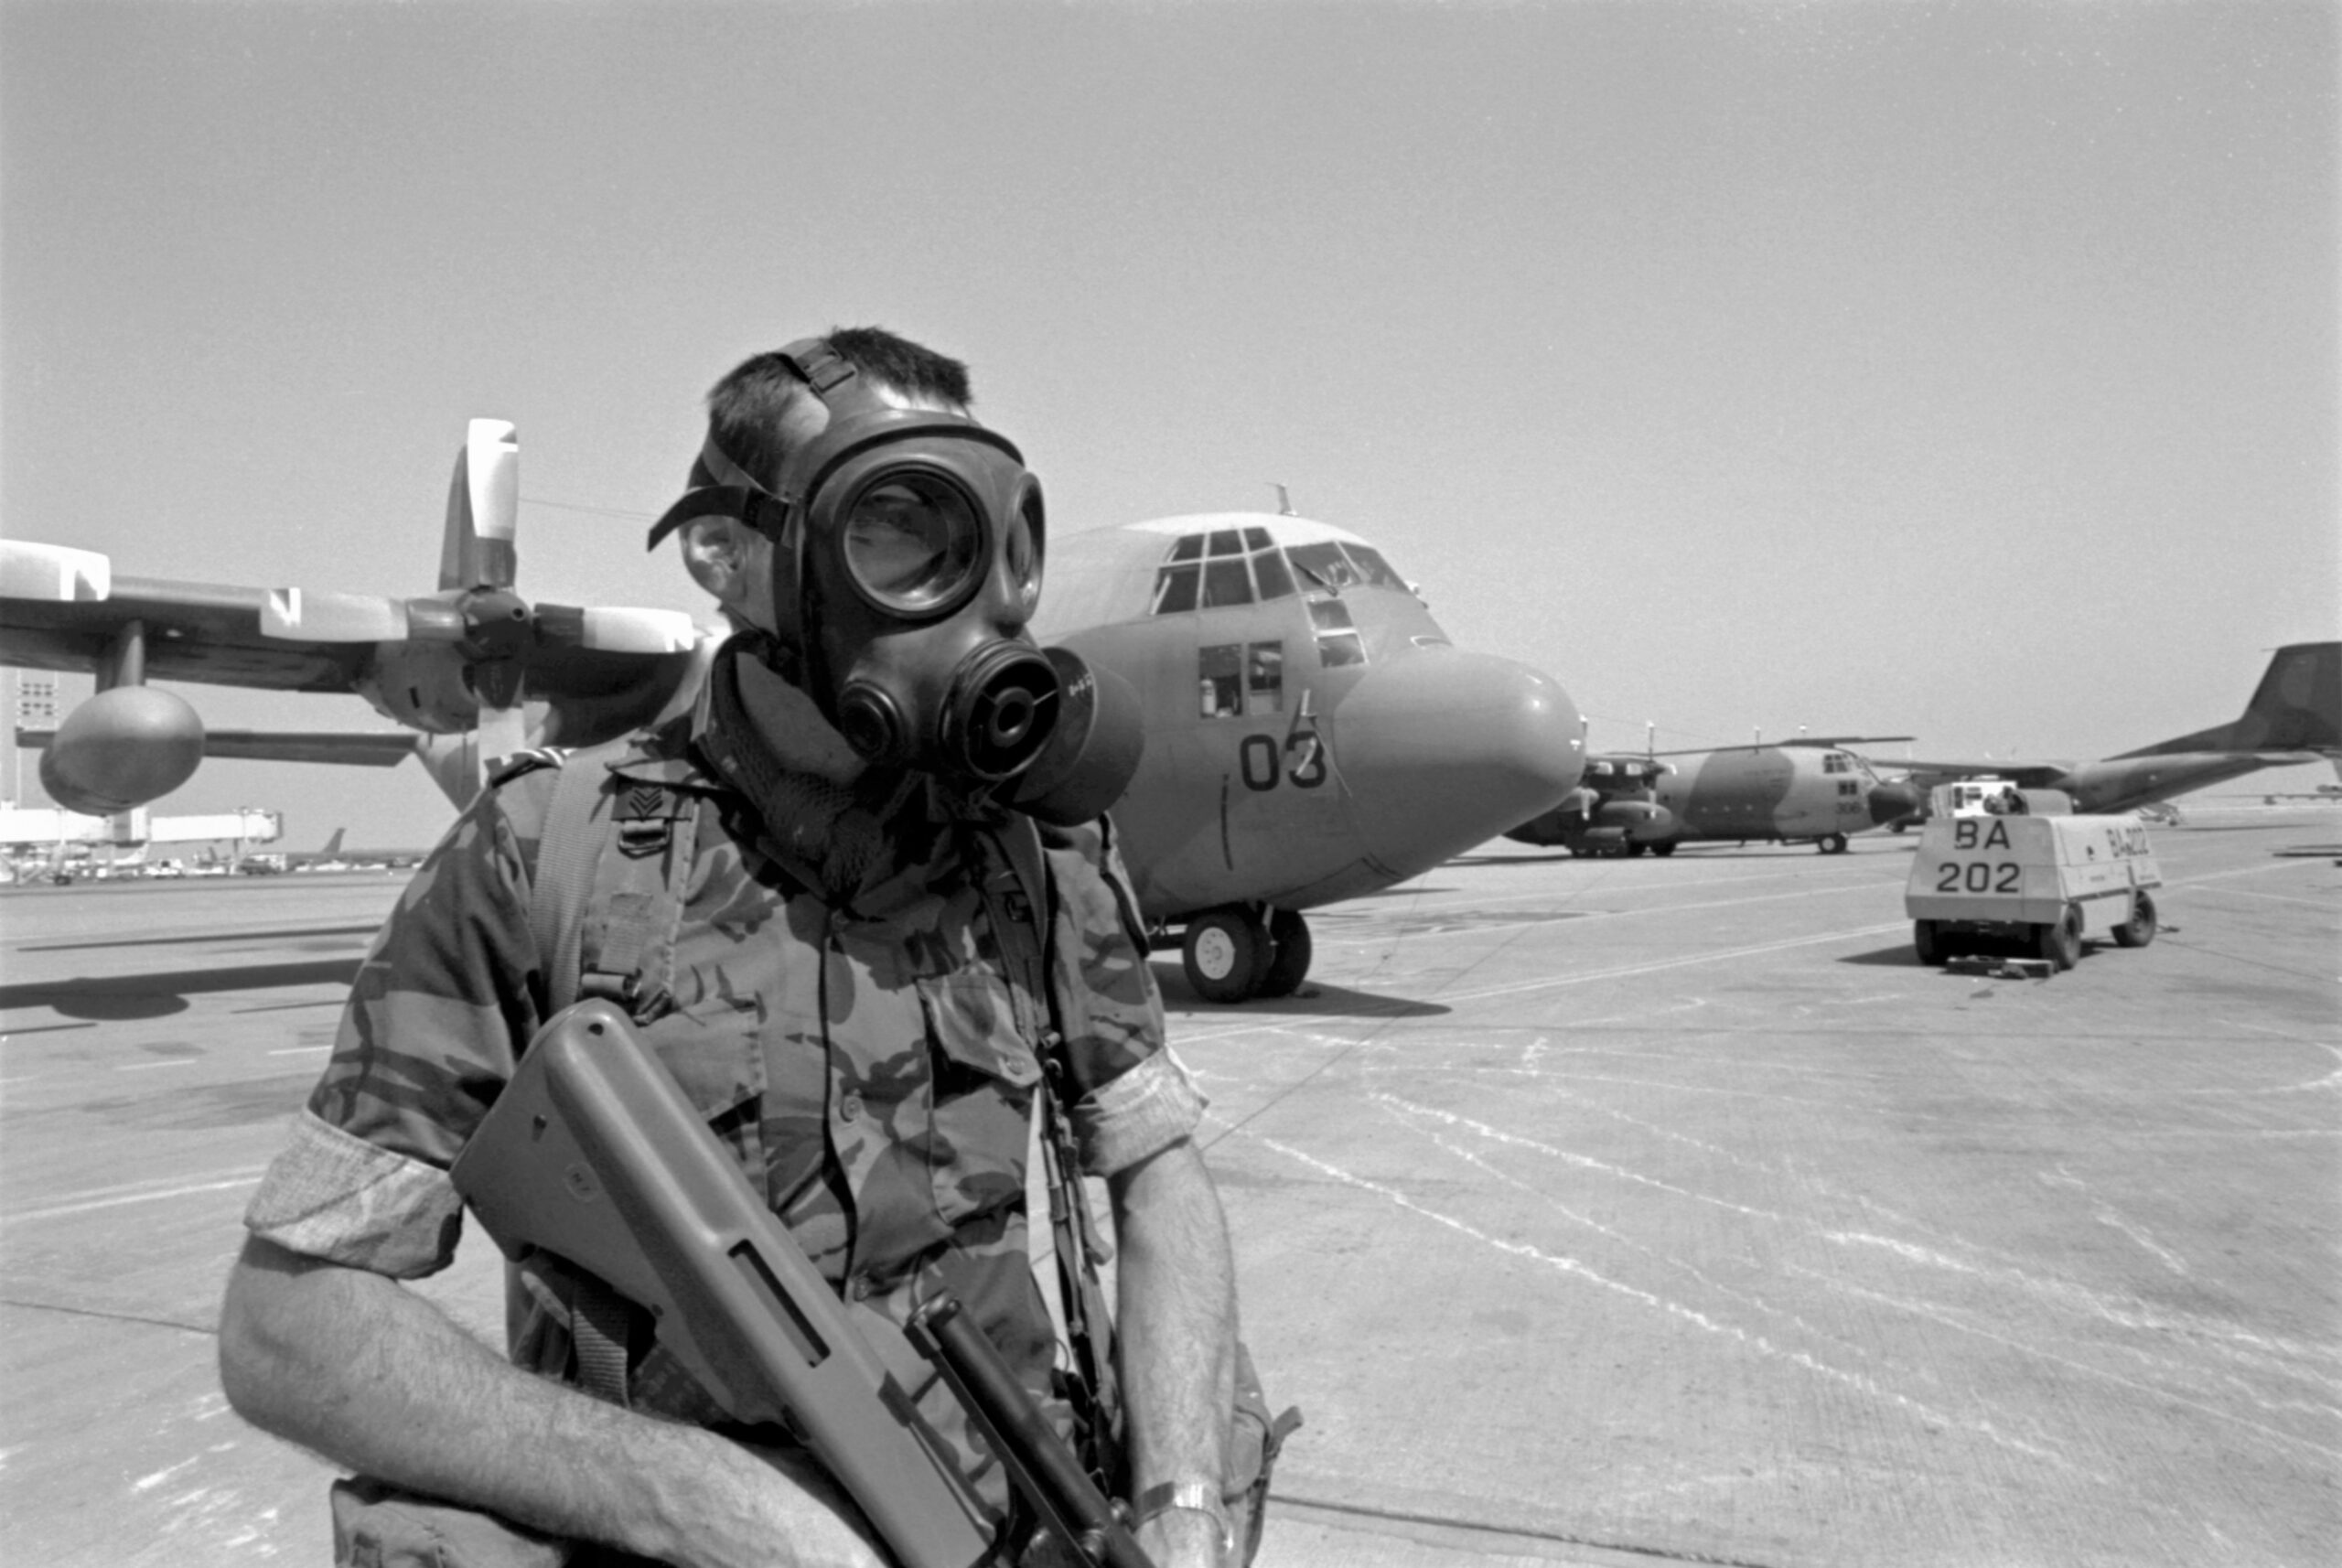 Sergeant Phil Lane, wearing a gas mask, on security duty on the tarmac in front of No. 40 Squadron Hercules NZ7003. Riyadh, Saudi Arabia, Feb-Mar 1991. Image ref PD14-2-91, RNZAF Official.